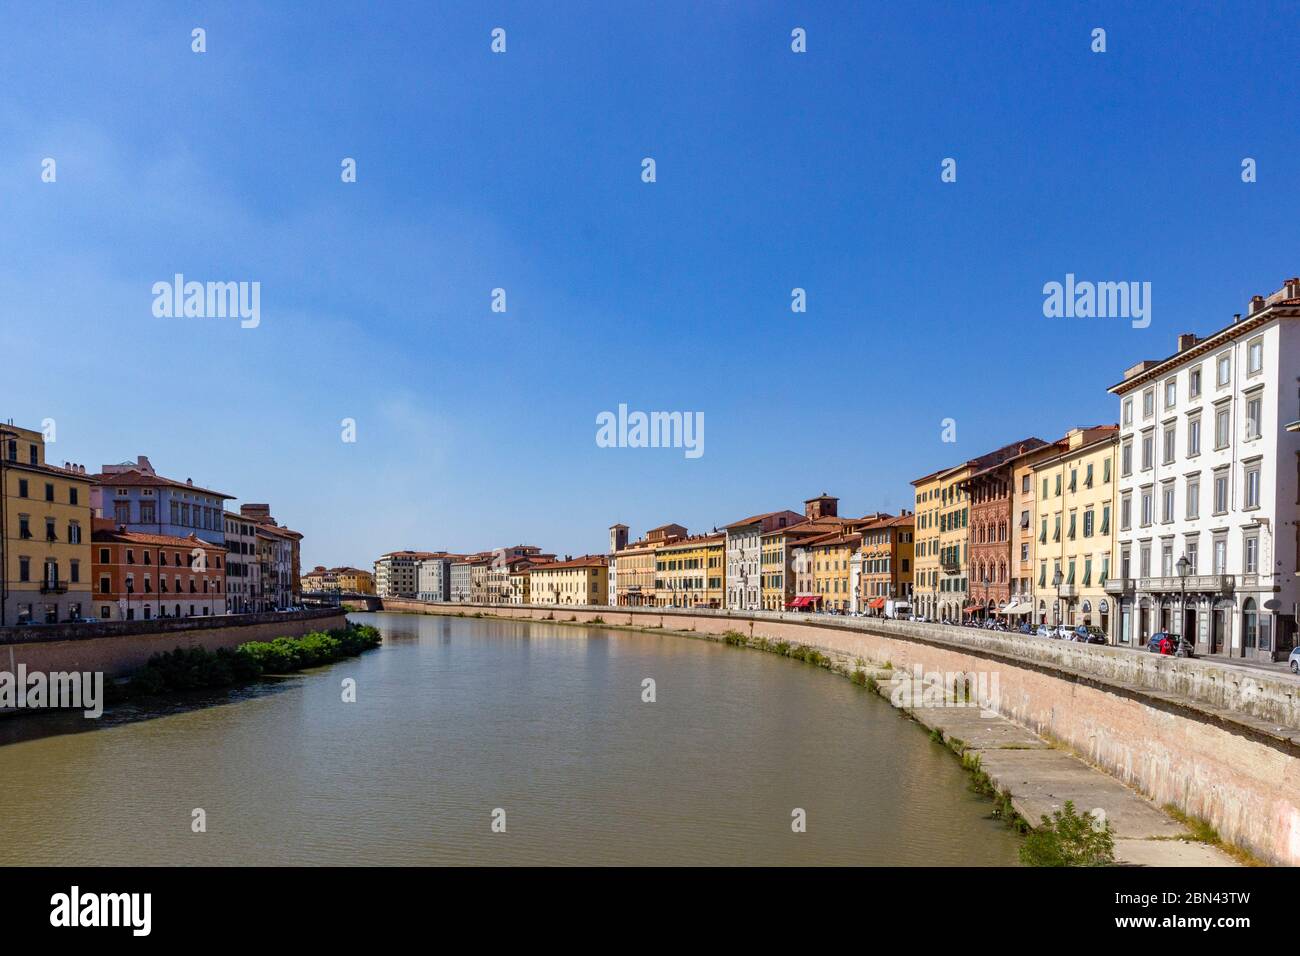 The Arno river bends through the city of Pisa, Italy, surrounded on both sides by a concrete wall and sunlit buildings Stock Photo